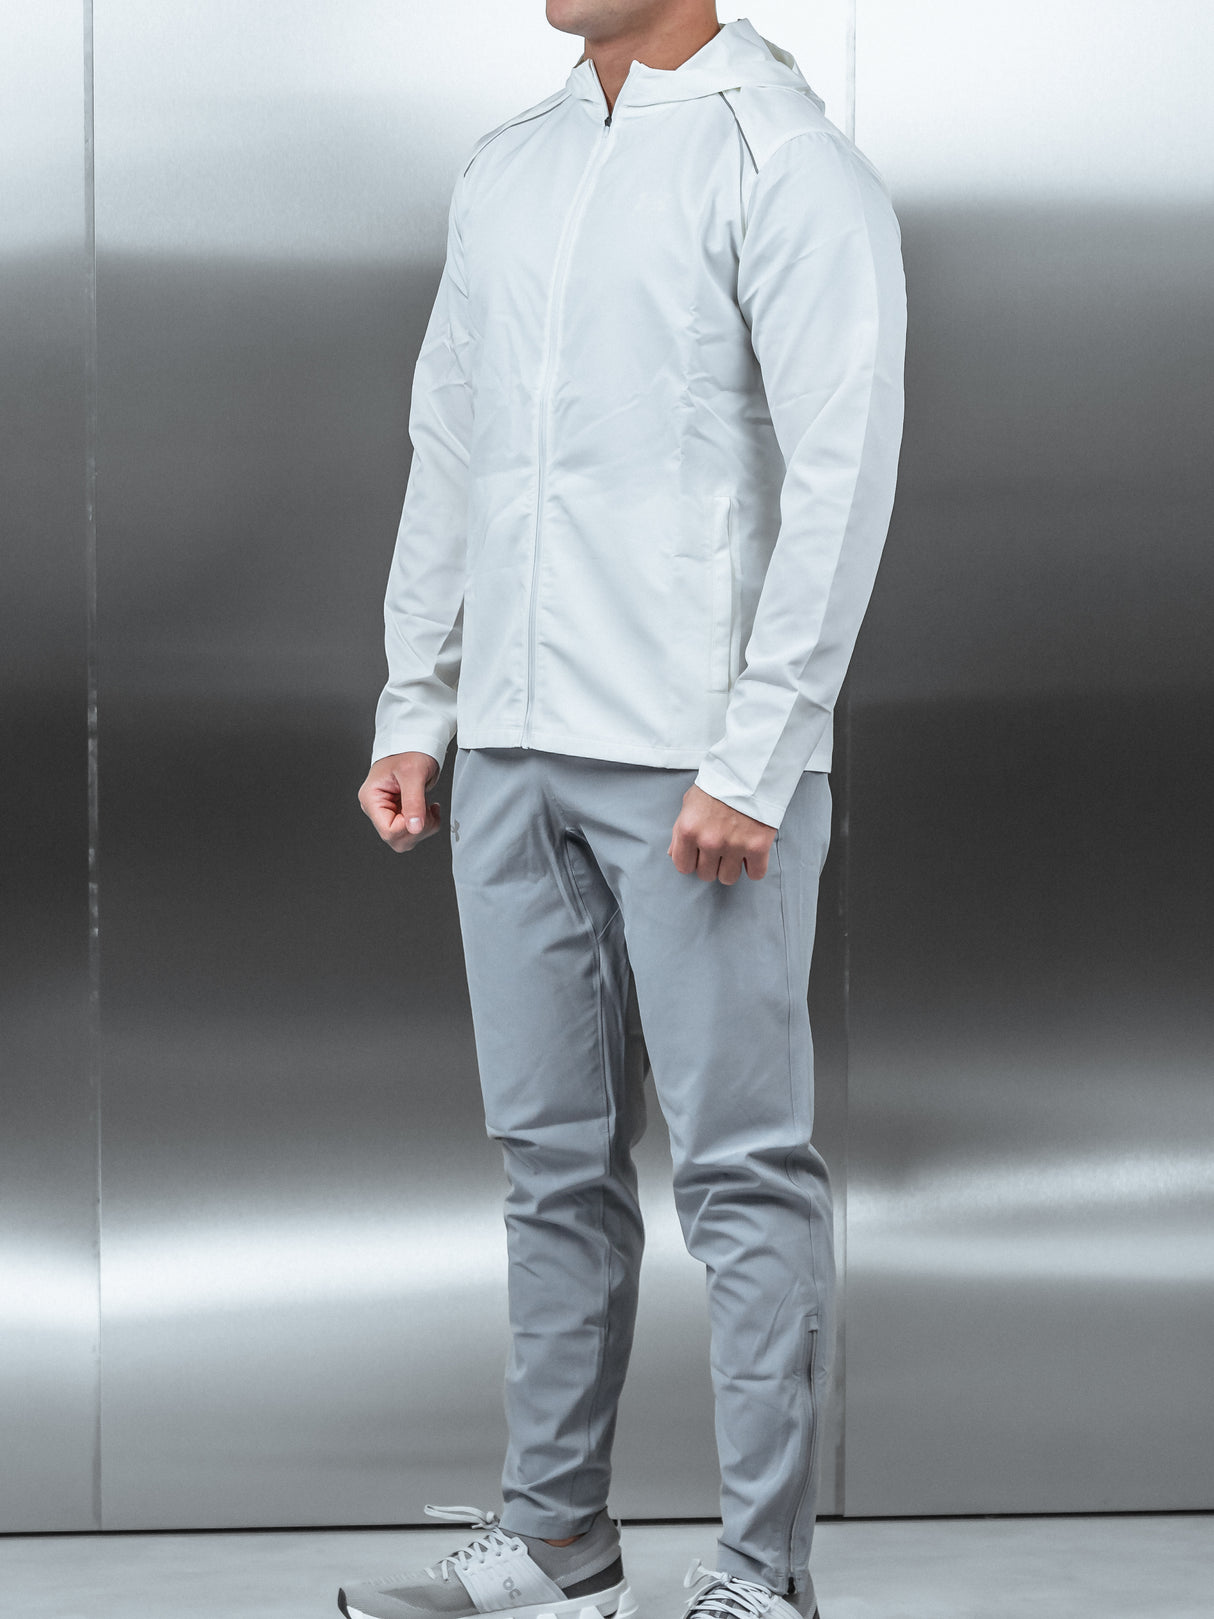 Under Armour - Storm Run Tracksuit - White/Grey